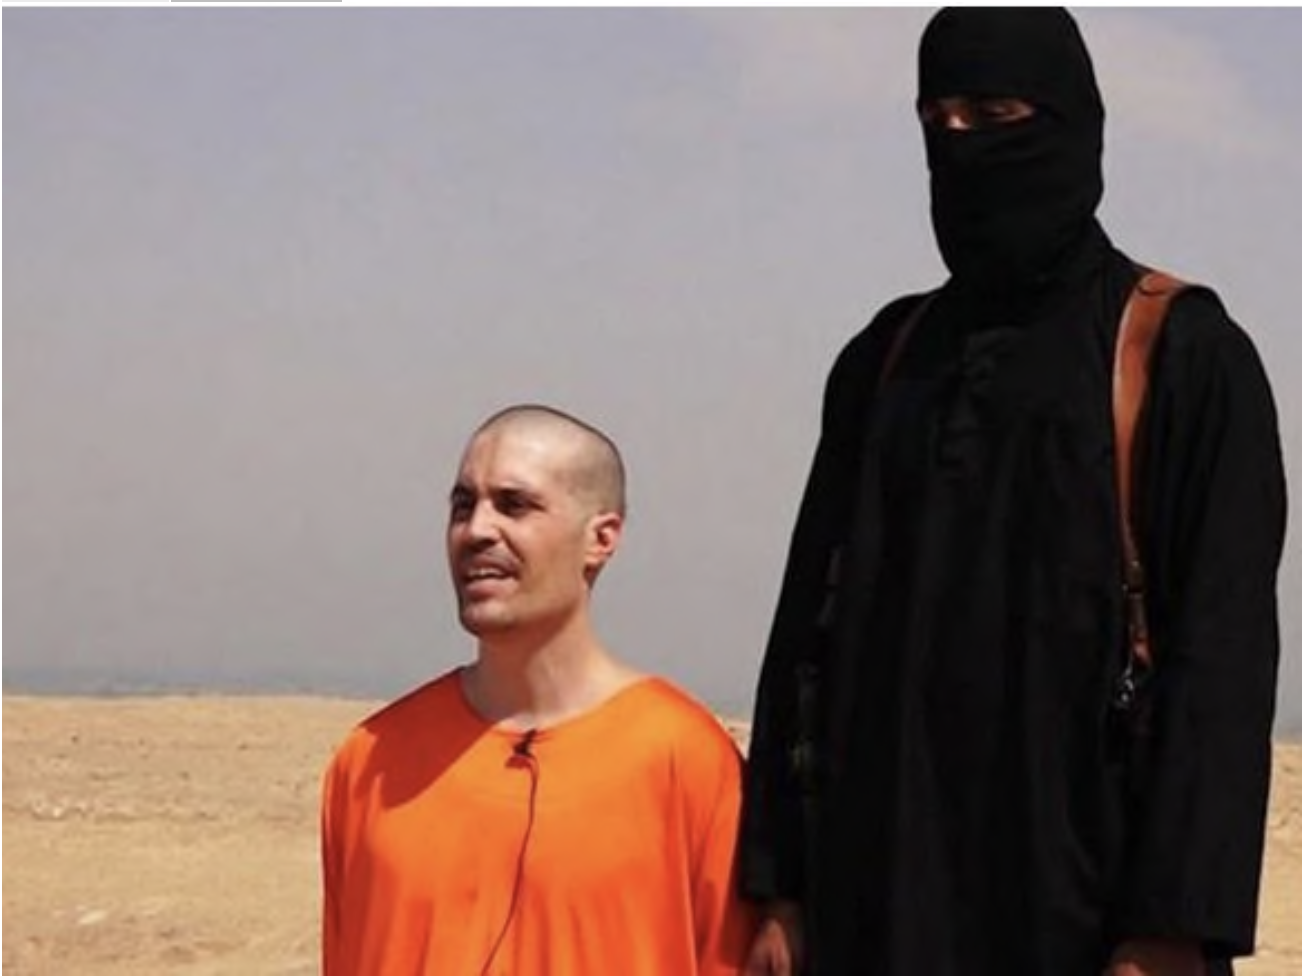 American journalist James Foley was captured and murdered by the Islamic State.Source:Supplied